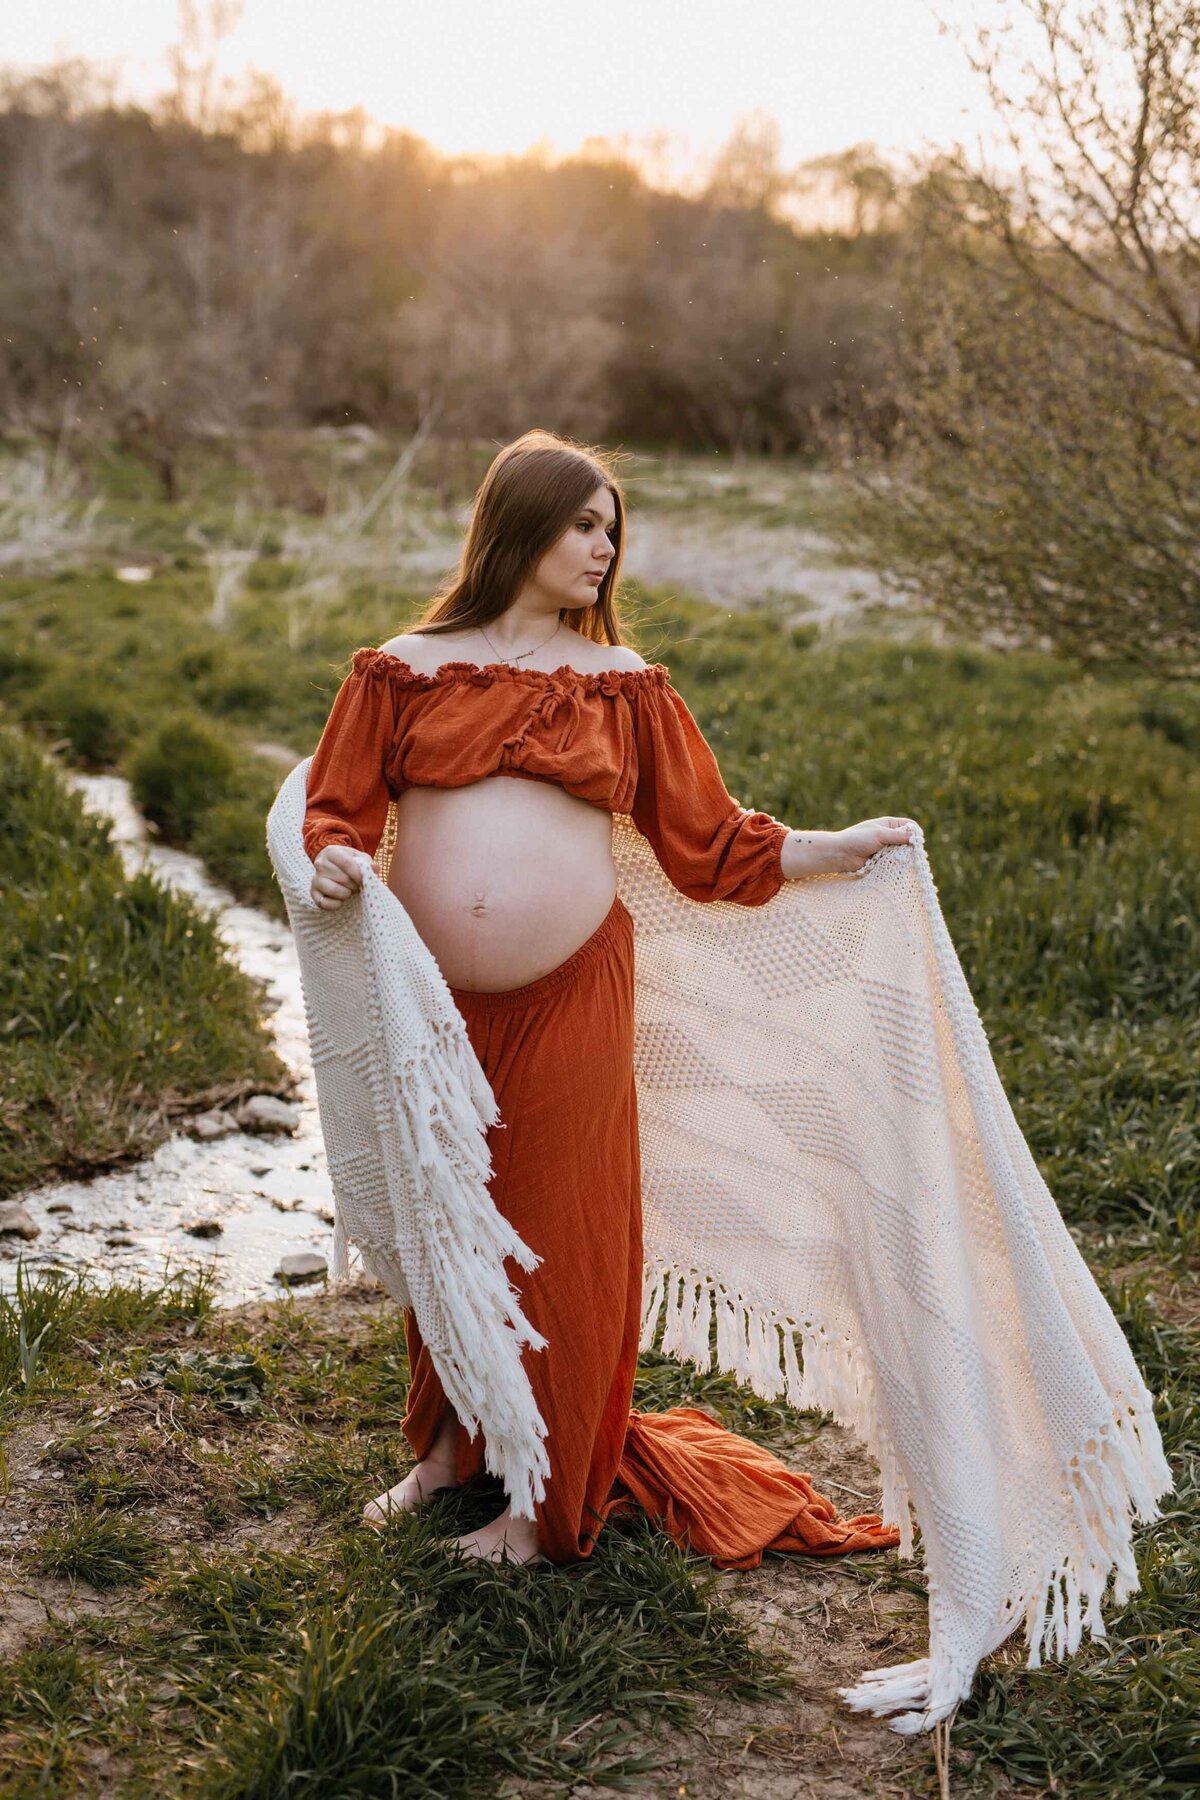 Mom standing in field in two-piece burnt orange top and skirt with belly exposed.  She is wrapped in a cream blanket flowing in the wind.